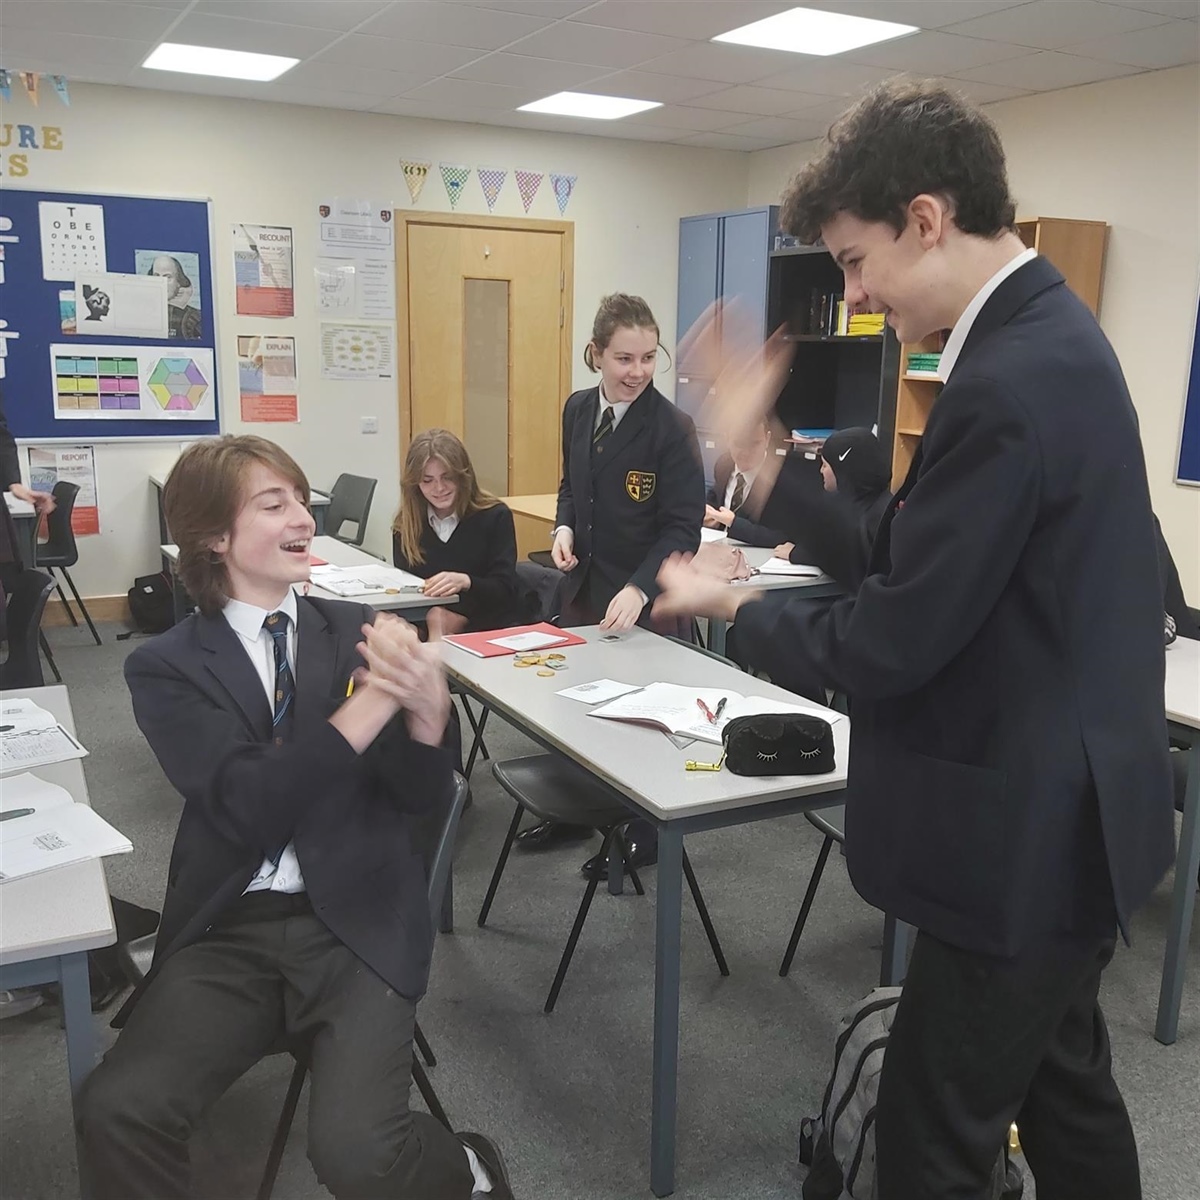 Year 10 students study 'An Inspector Calls' by J.B Priestley